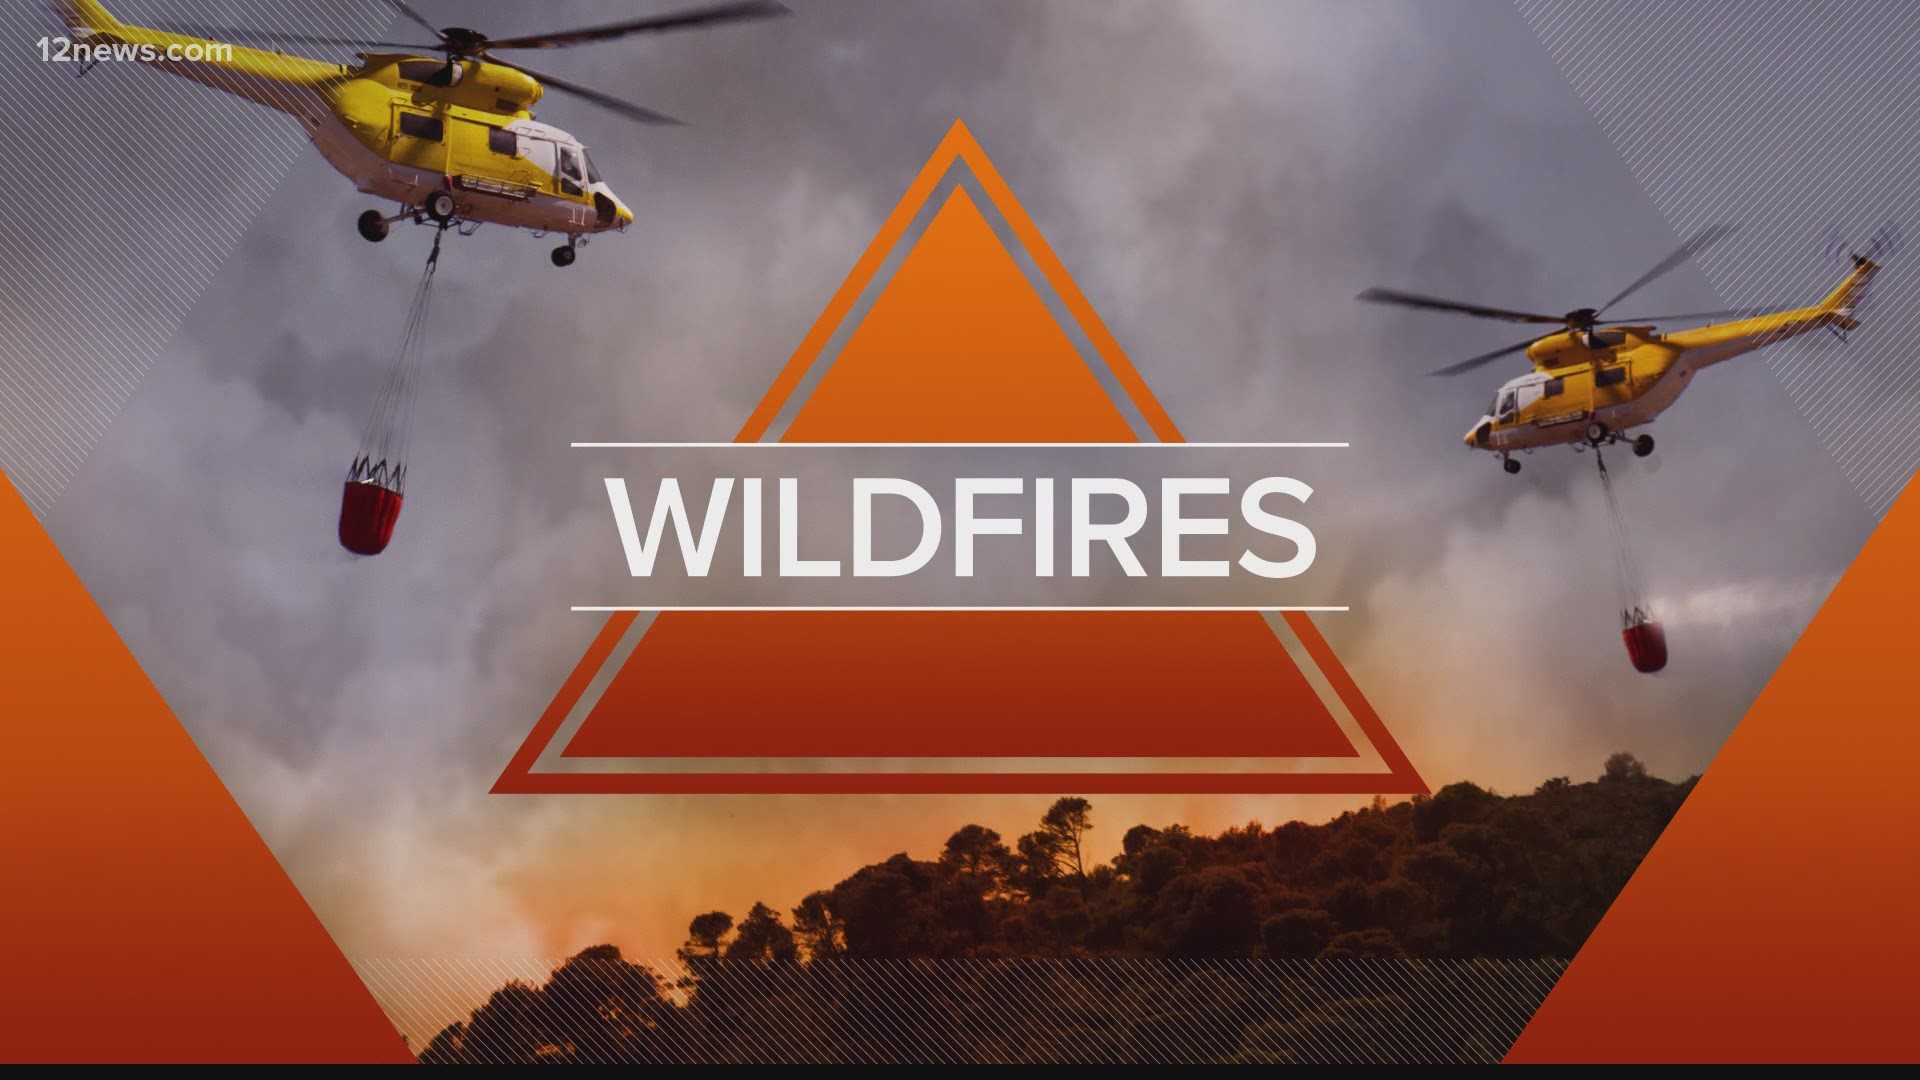 There are several wildfires currently burning across Arizona. Here's the latest update on firefighting efforts for June 19, 2021.